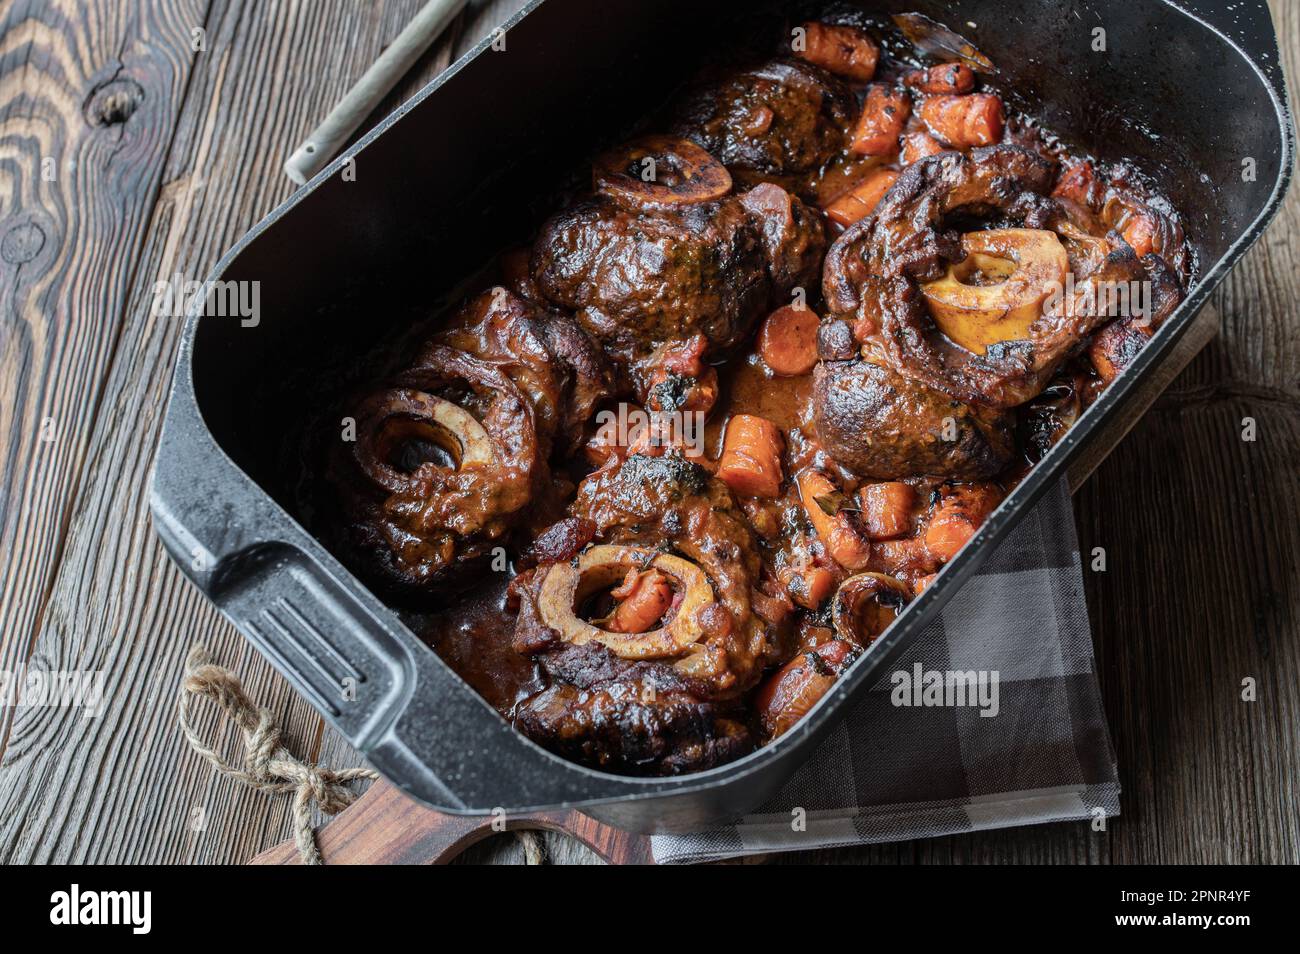 Braised beef shanks or ossubuco in roasting pot on wooden table. Stock Photo